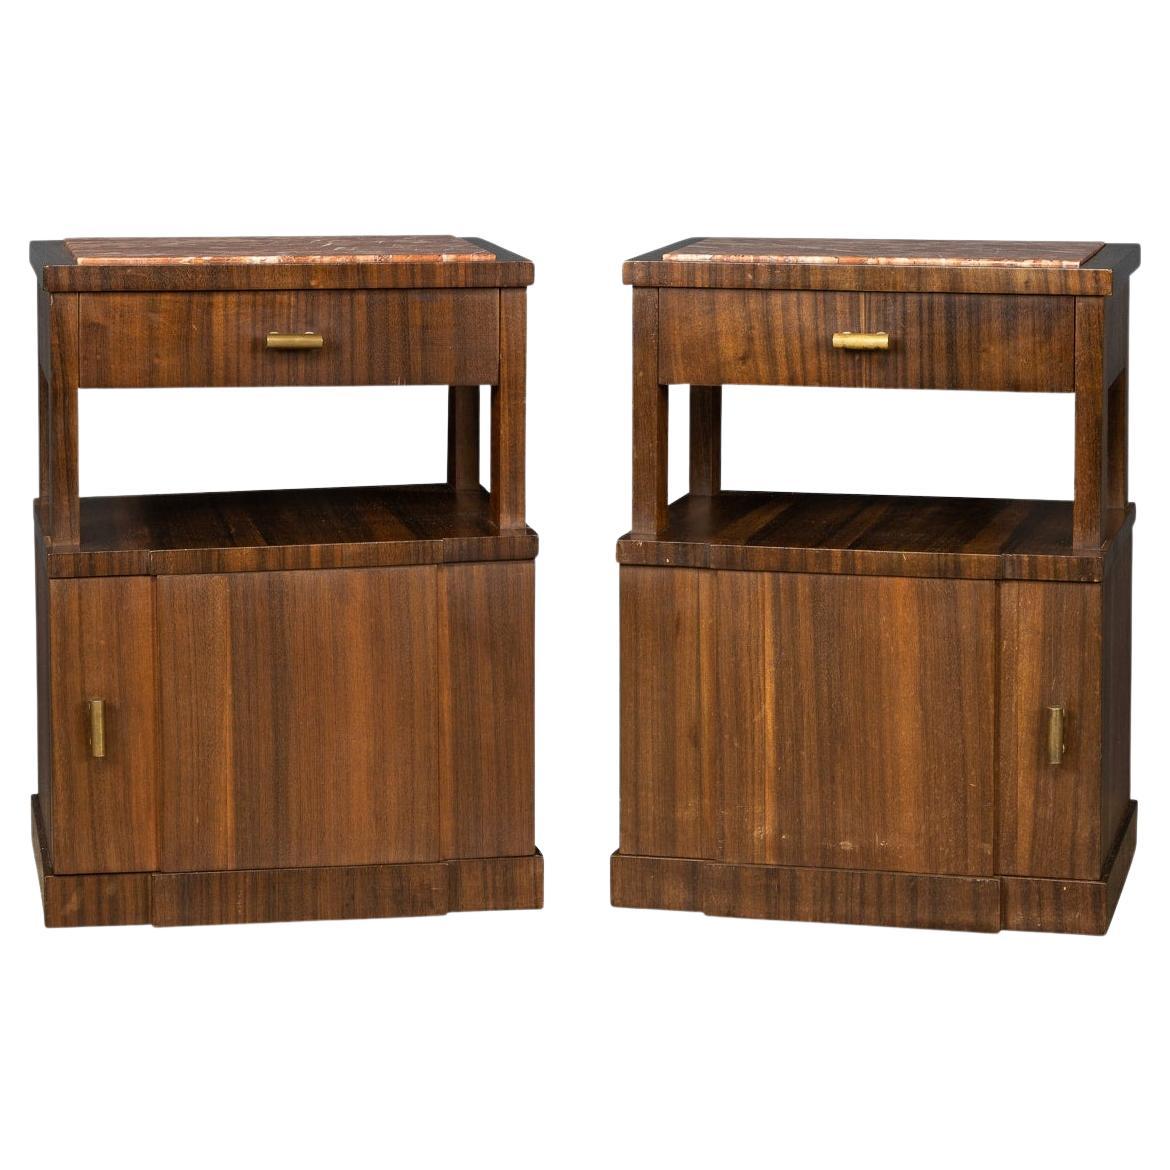 20th Century Italian Pair of Kingwood & Marble Bedside Cabinets, C.1950 For Sale